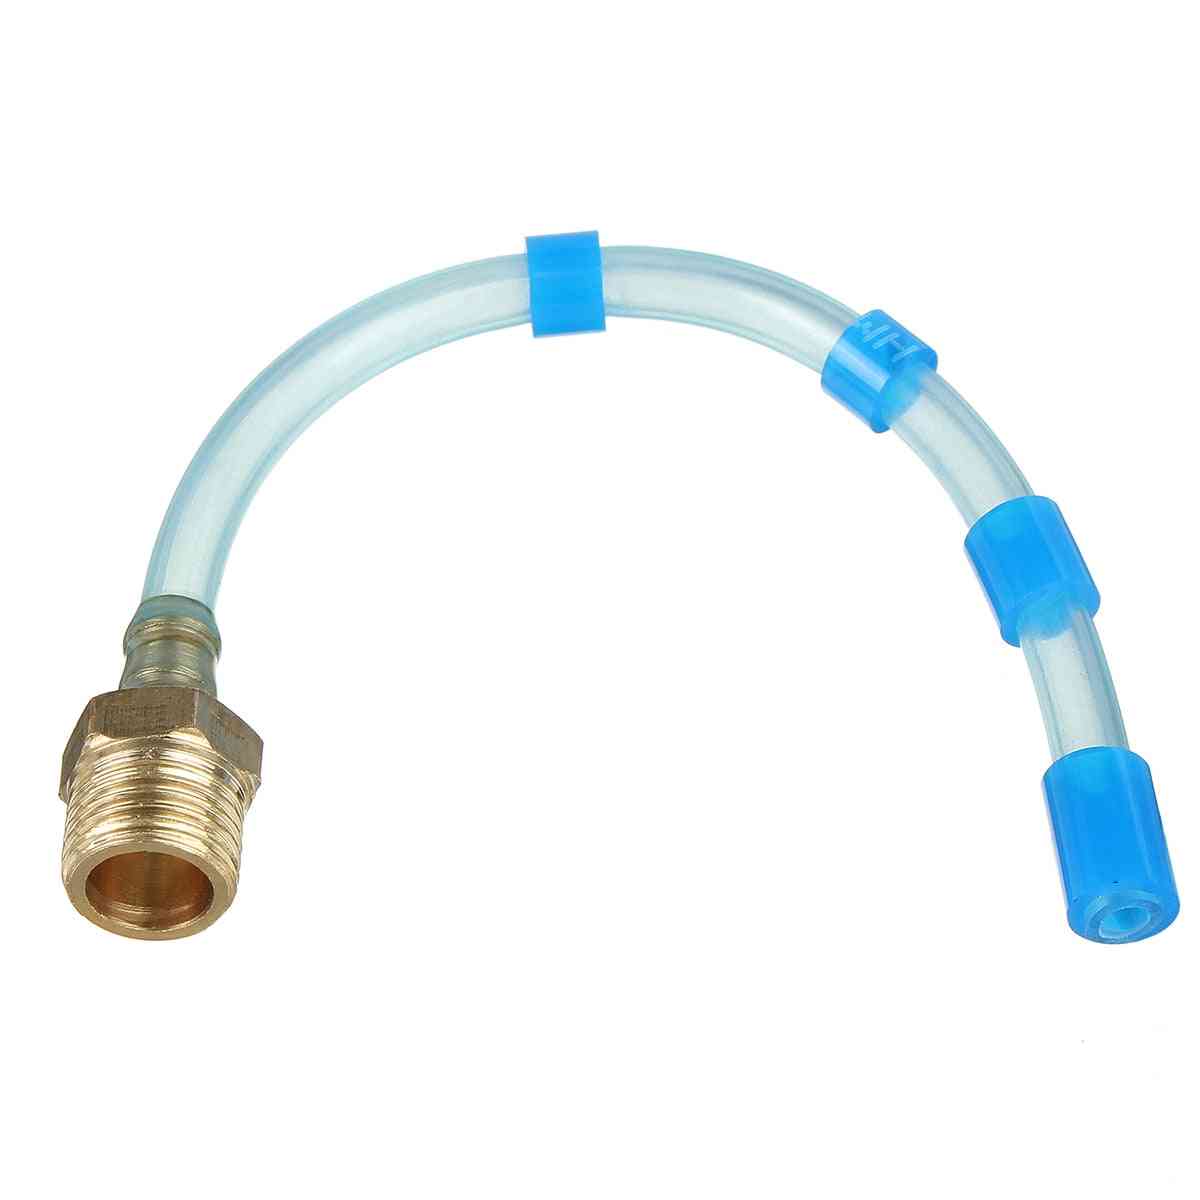 Car Liquid Water, Pipe Hose Tube With Connector For Cleaning Gun, Wash Parts